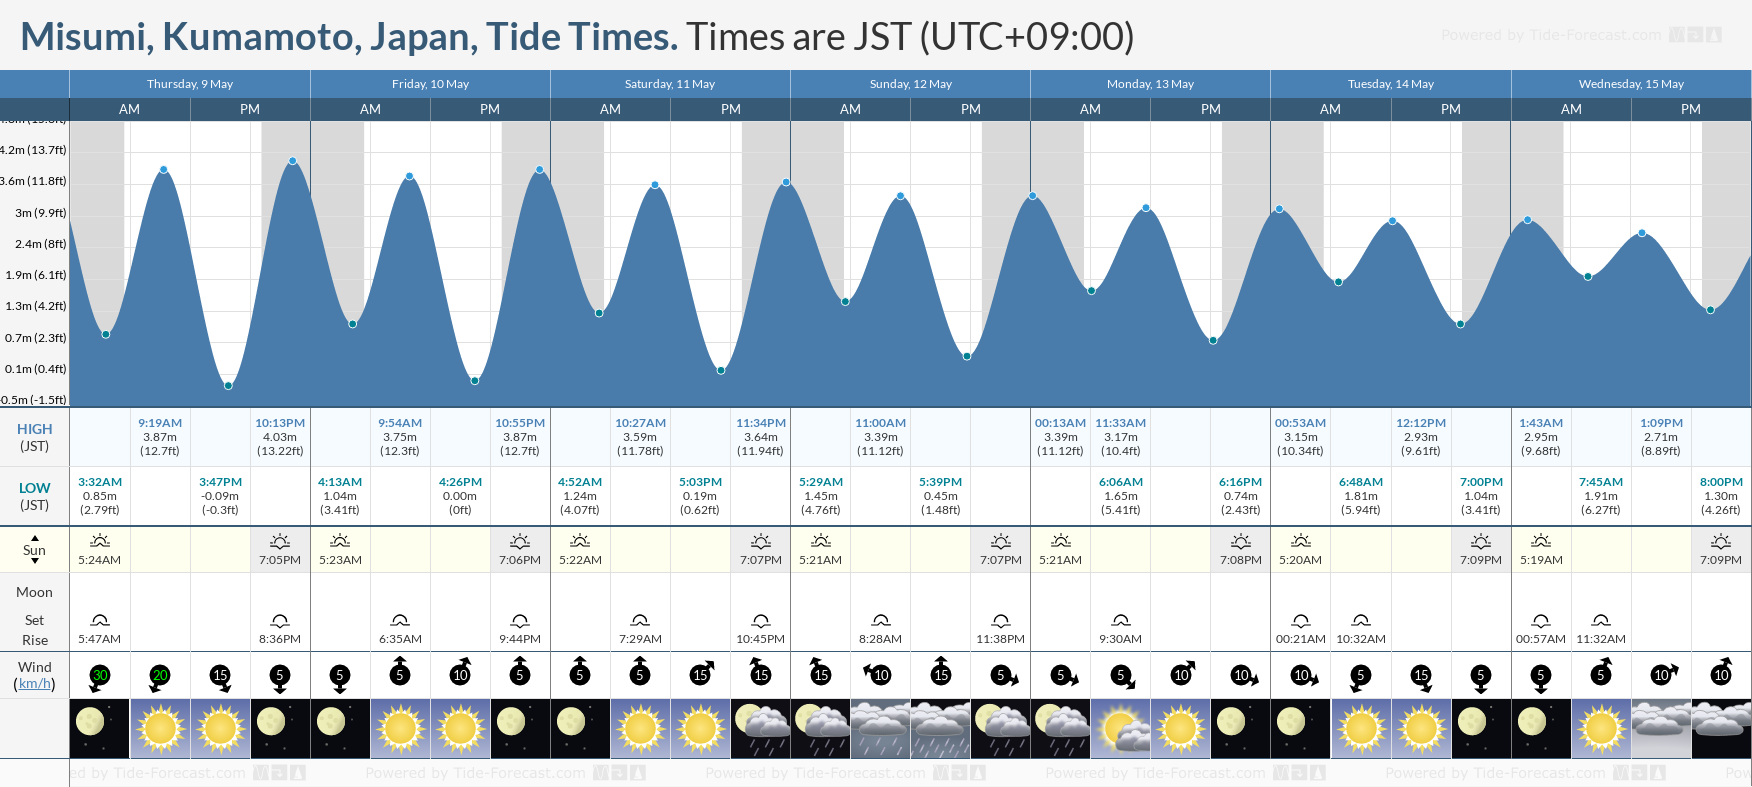 Misumi, Kumamoto, Japan Tide Chart including high and low tide tide times for the next 7 days